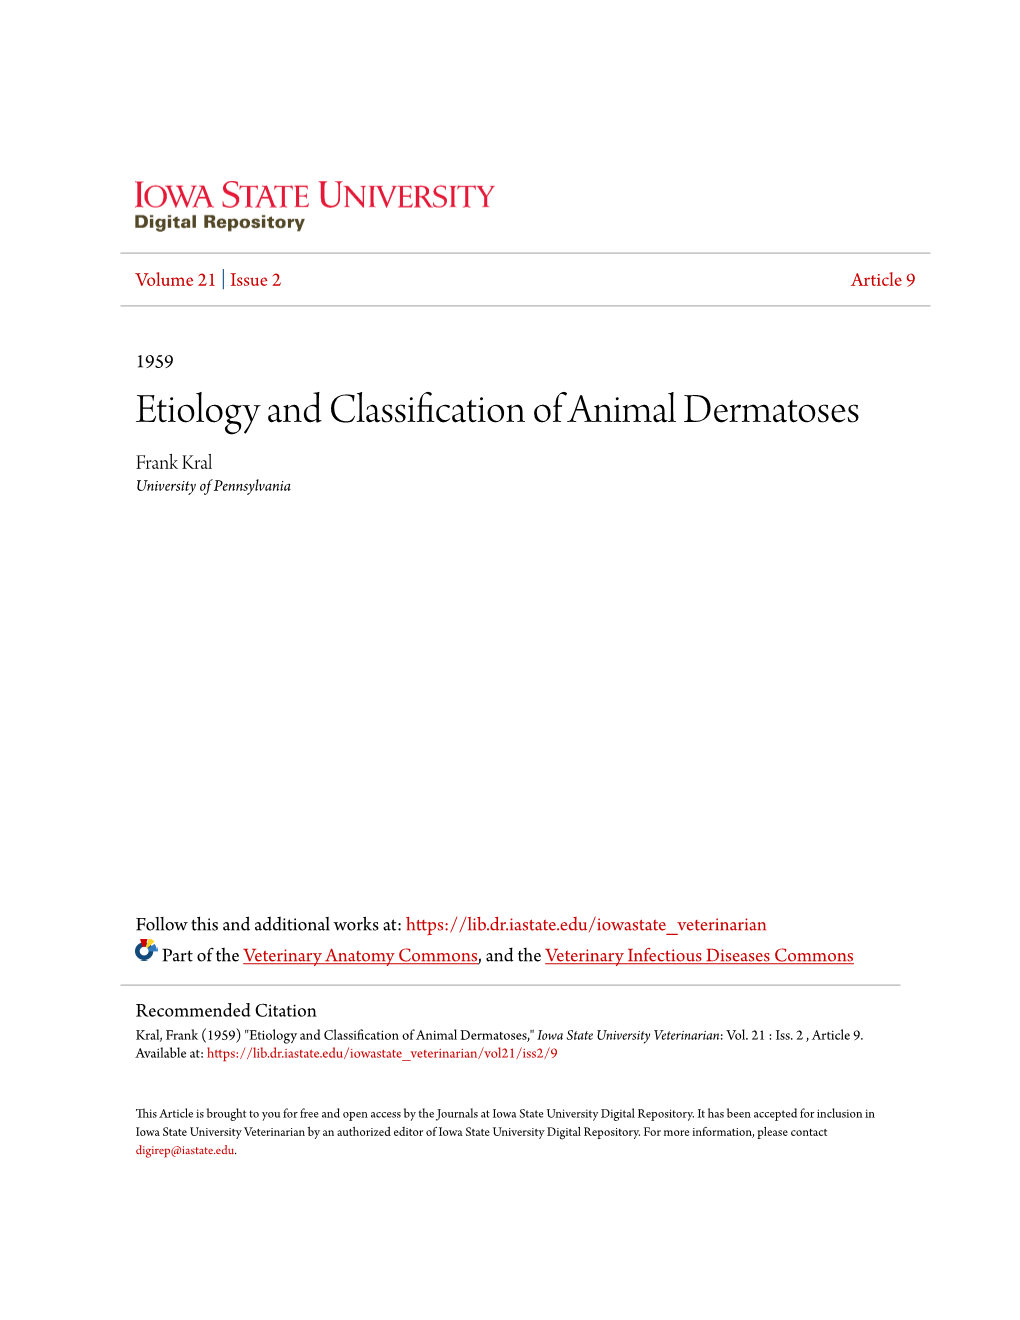 Etiology and Classification of Animal Dermatoses Frank Kral University of Pennsylvania